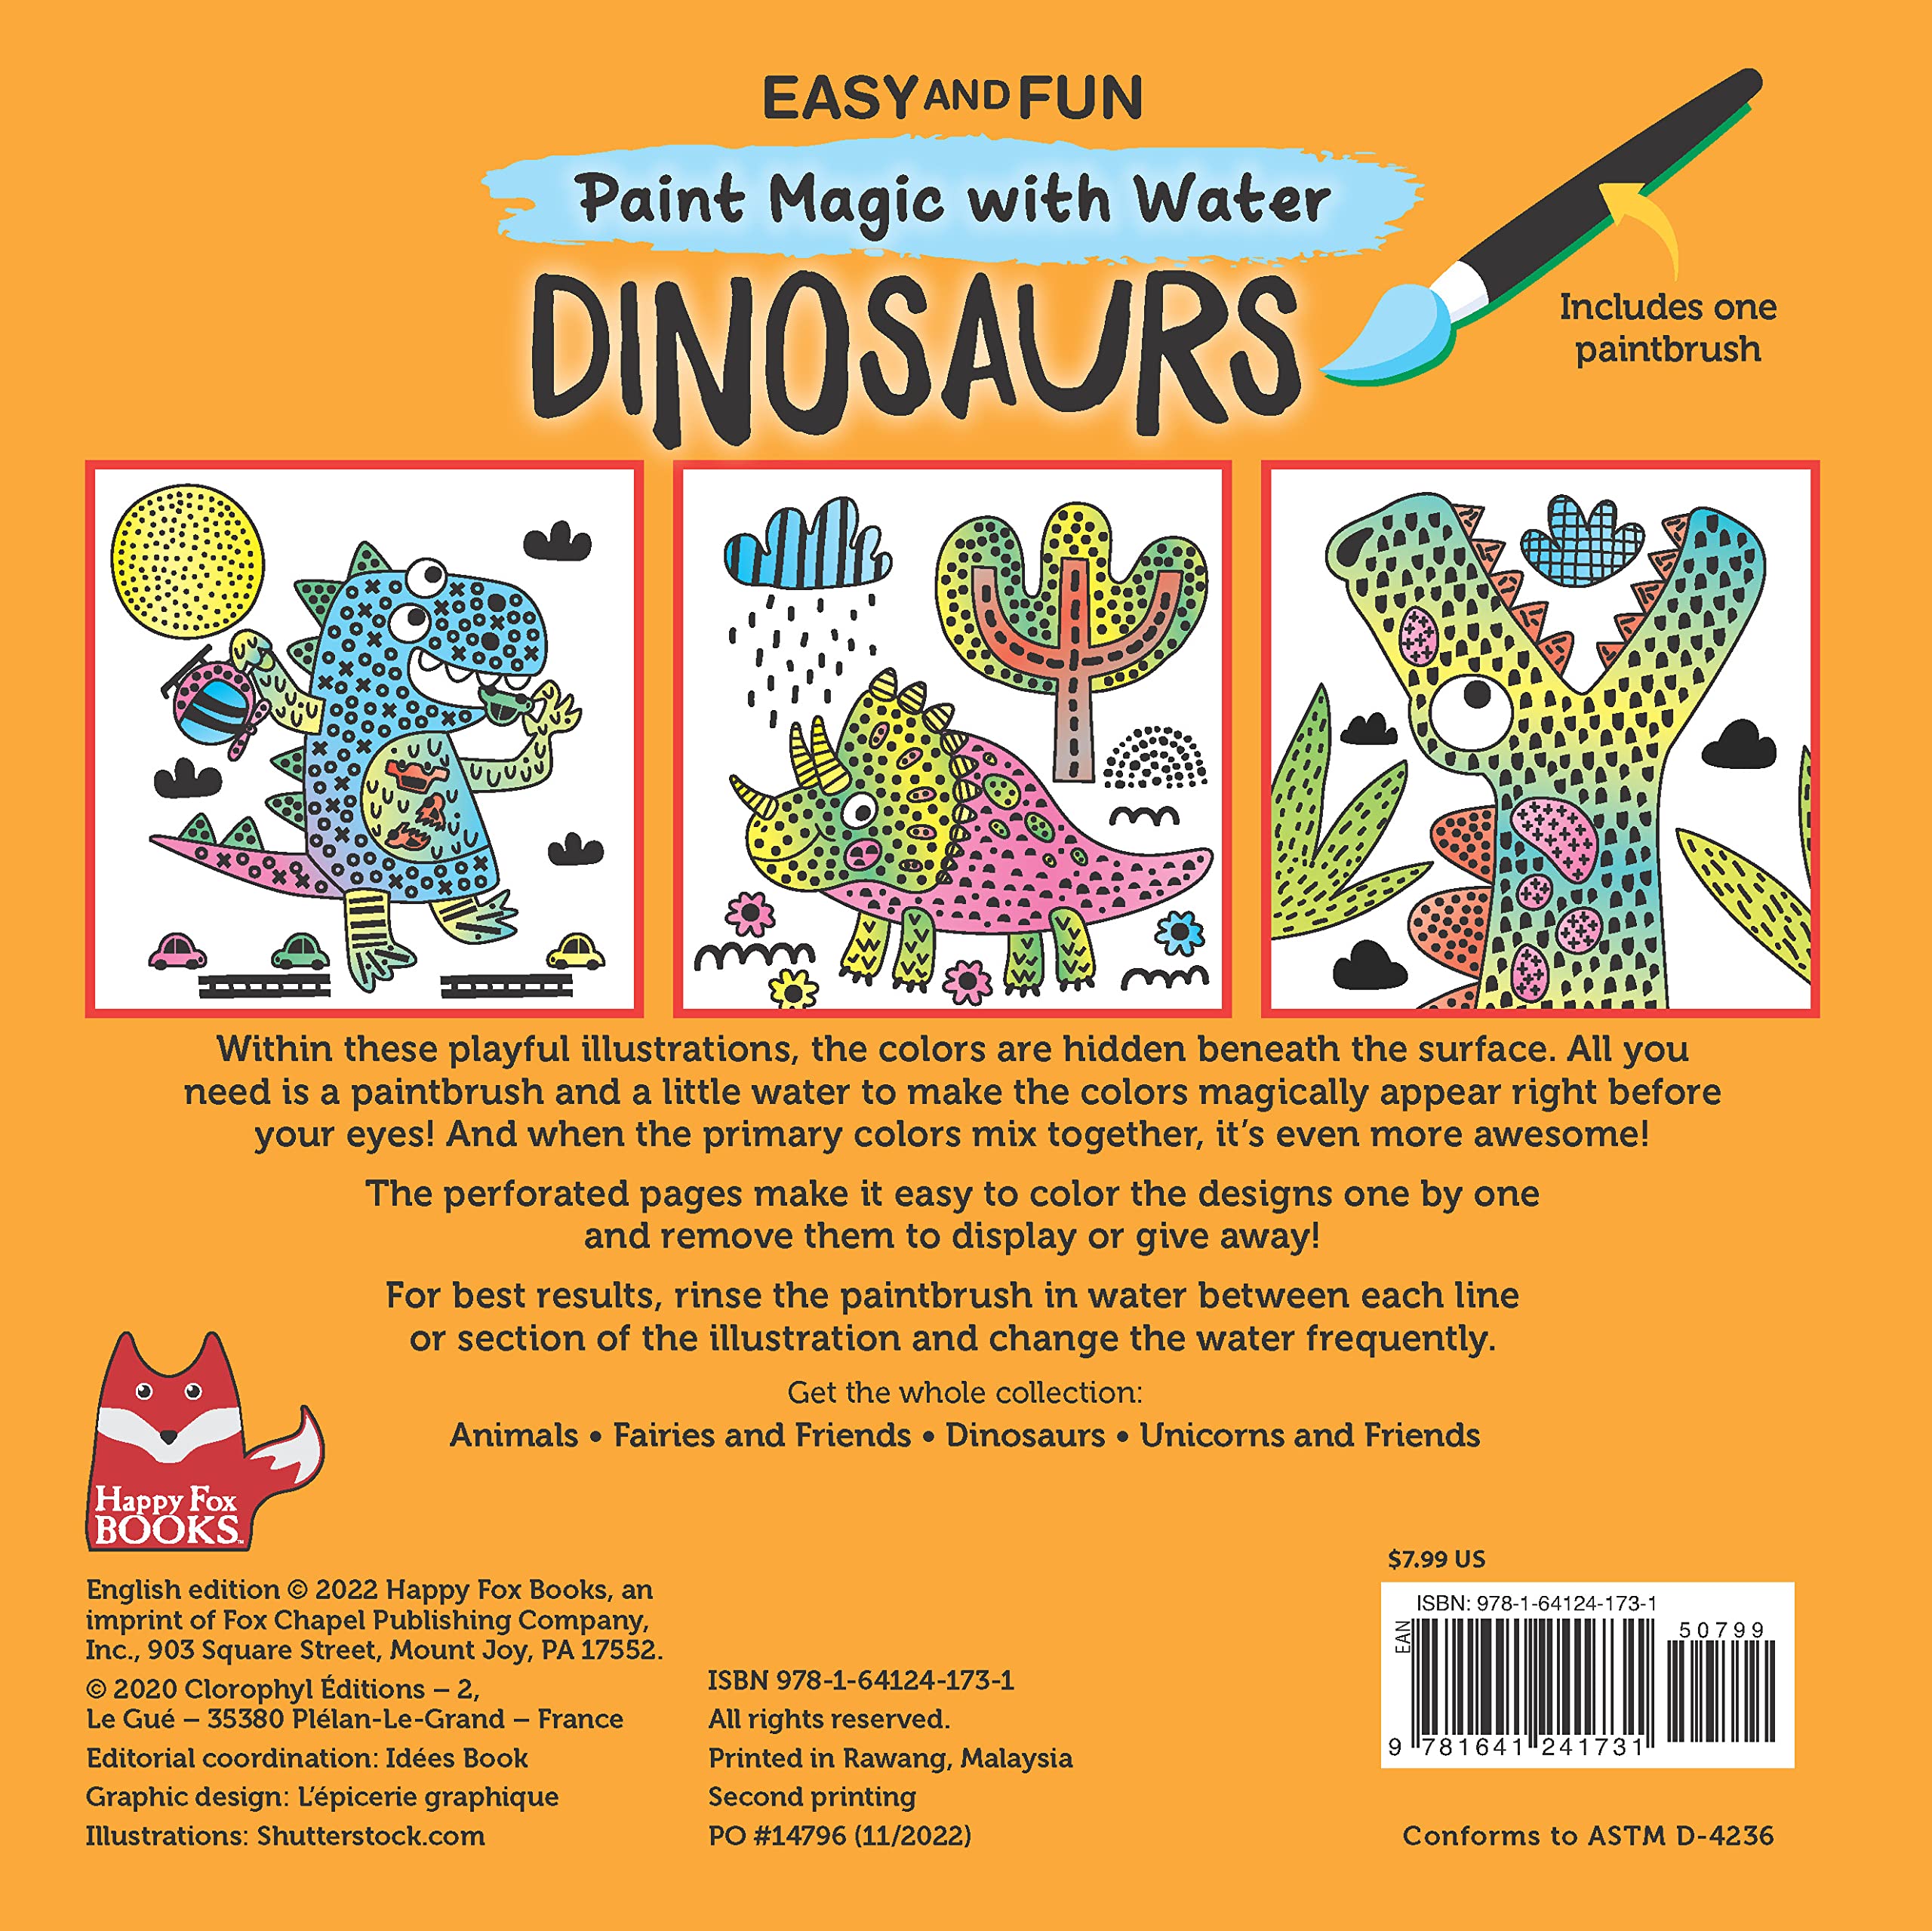 Easy and Fun Paint Magic with Water: Dinosaurs (Happy Fox Books) Paintbrush Included - Mess-Free Painting for Kids 3-6 to Create T. Rexes, Triceratops, Pterodactyls, and More with Just Cold Water